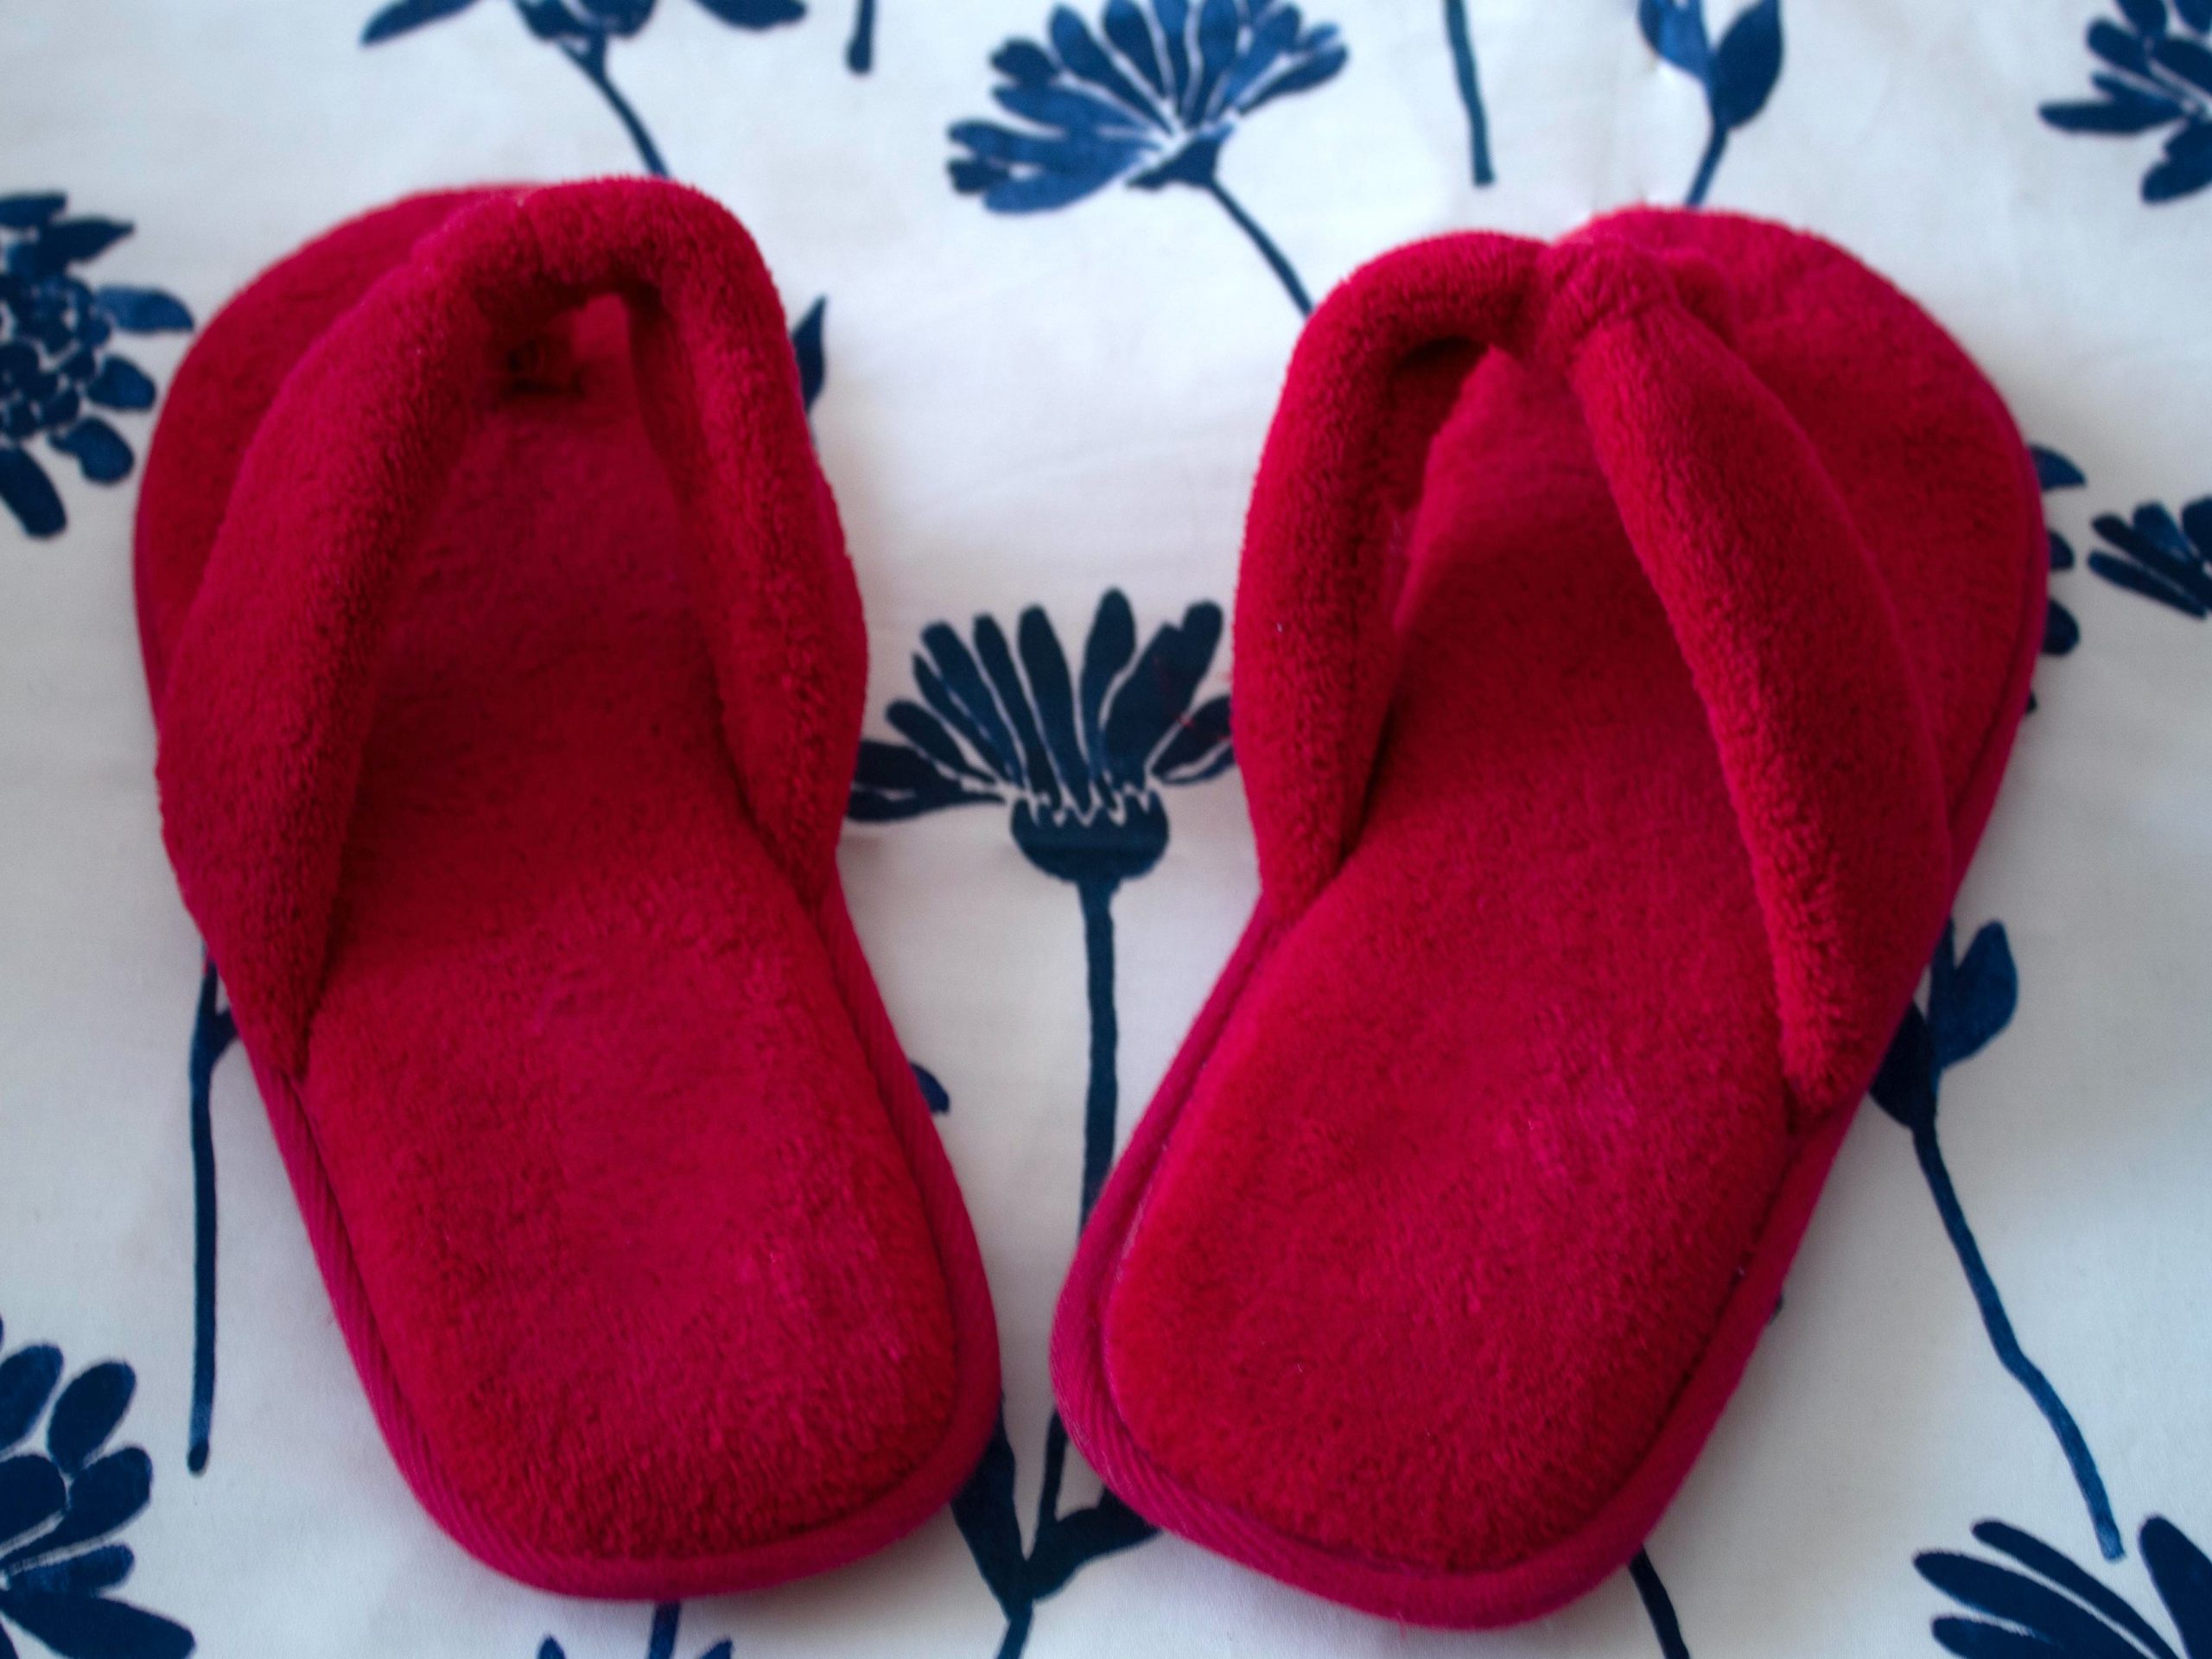 Red fuzzy slippers on blue-and-white blanket